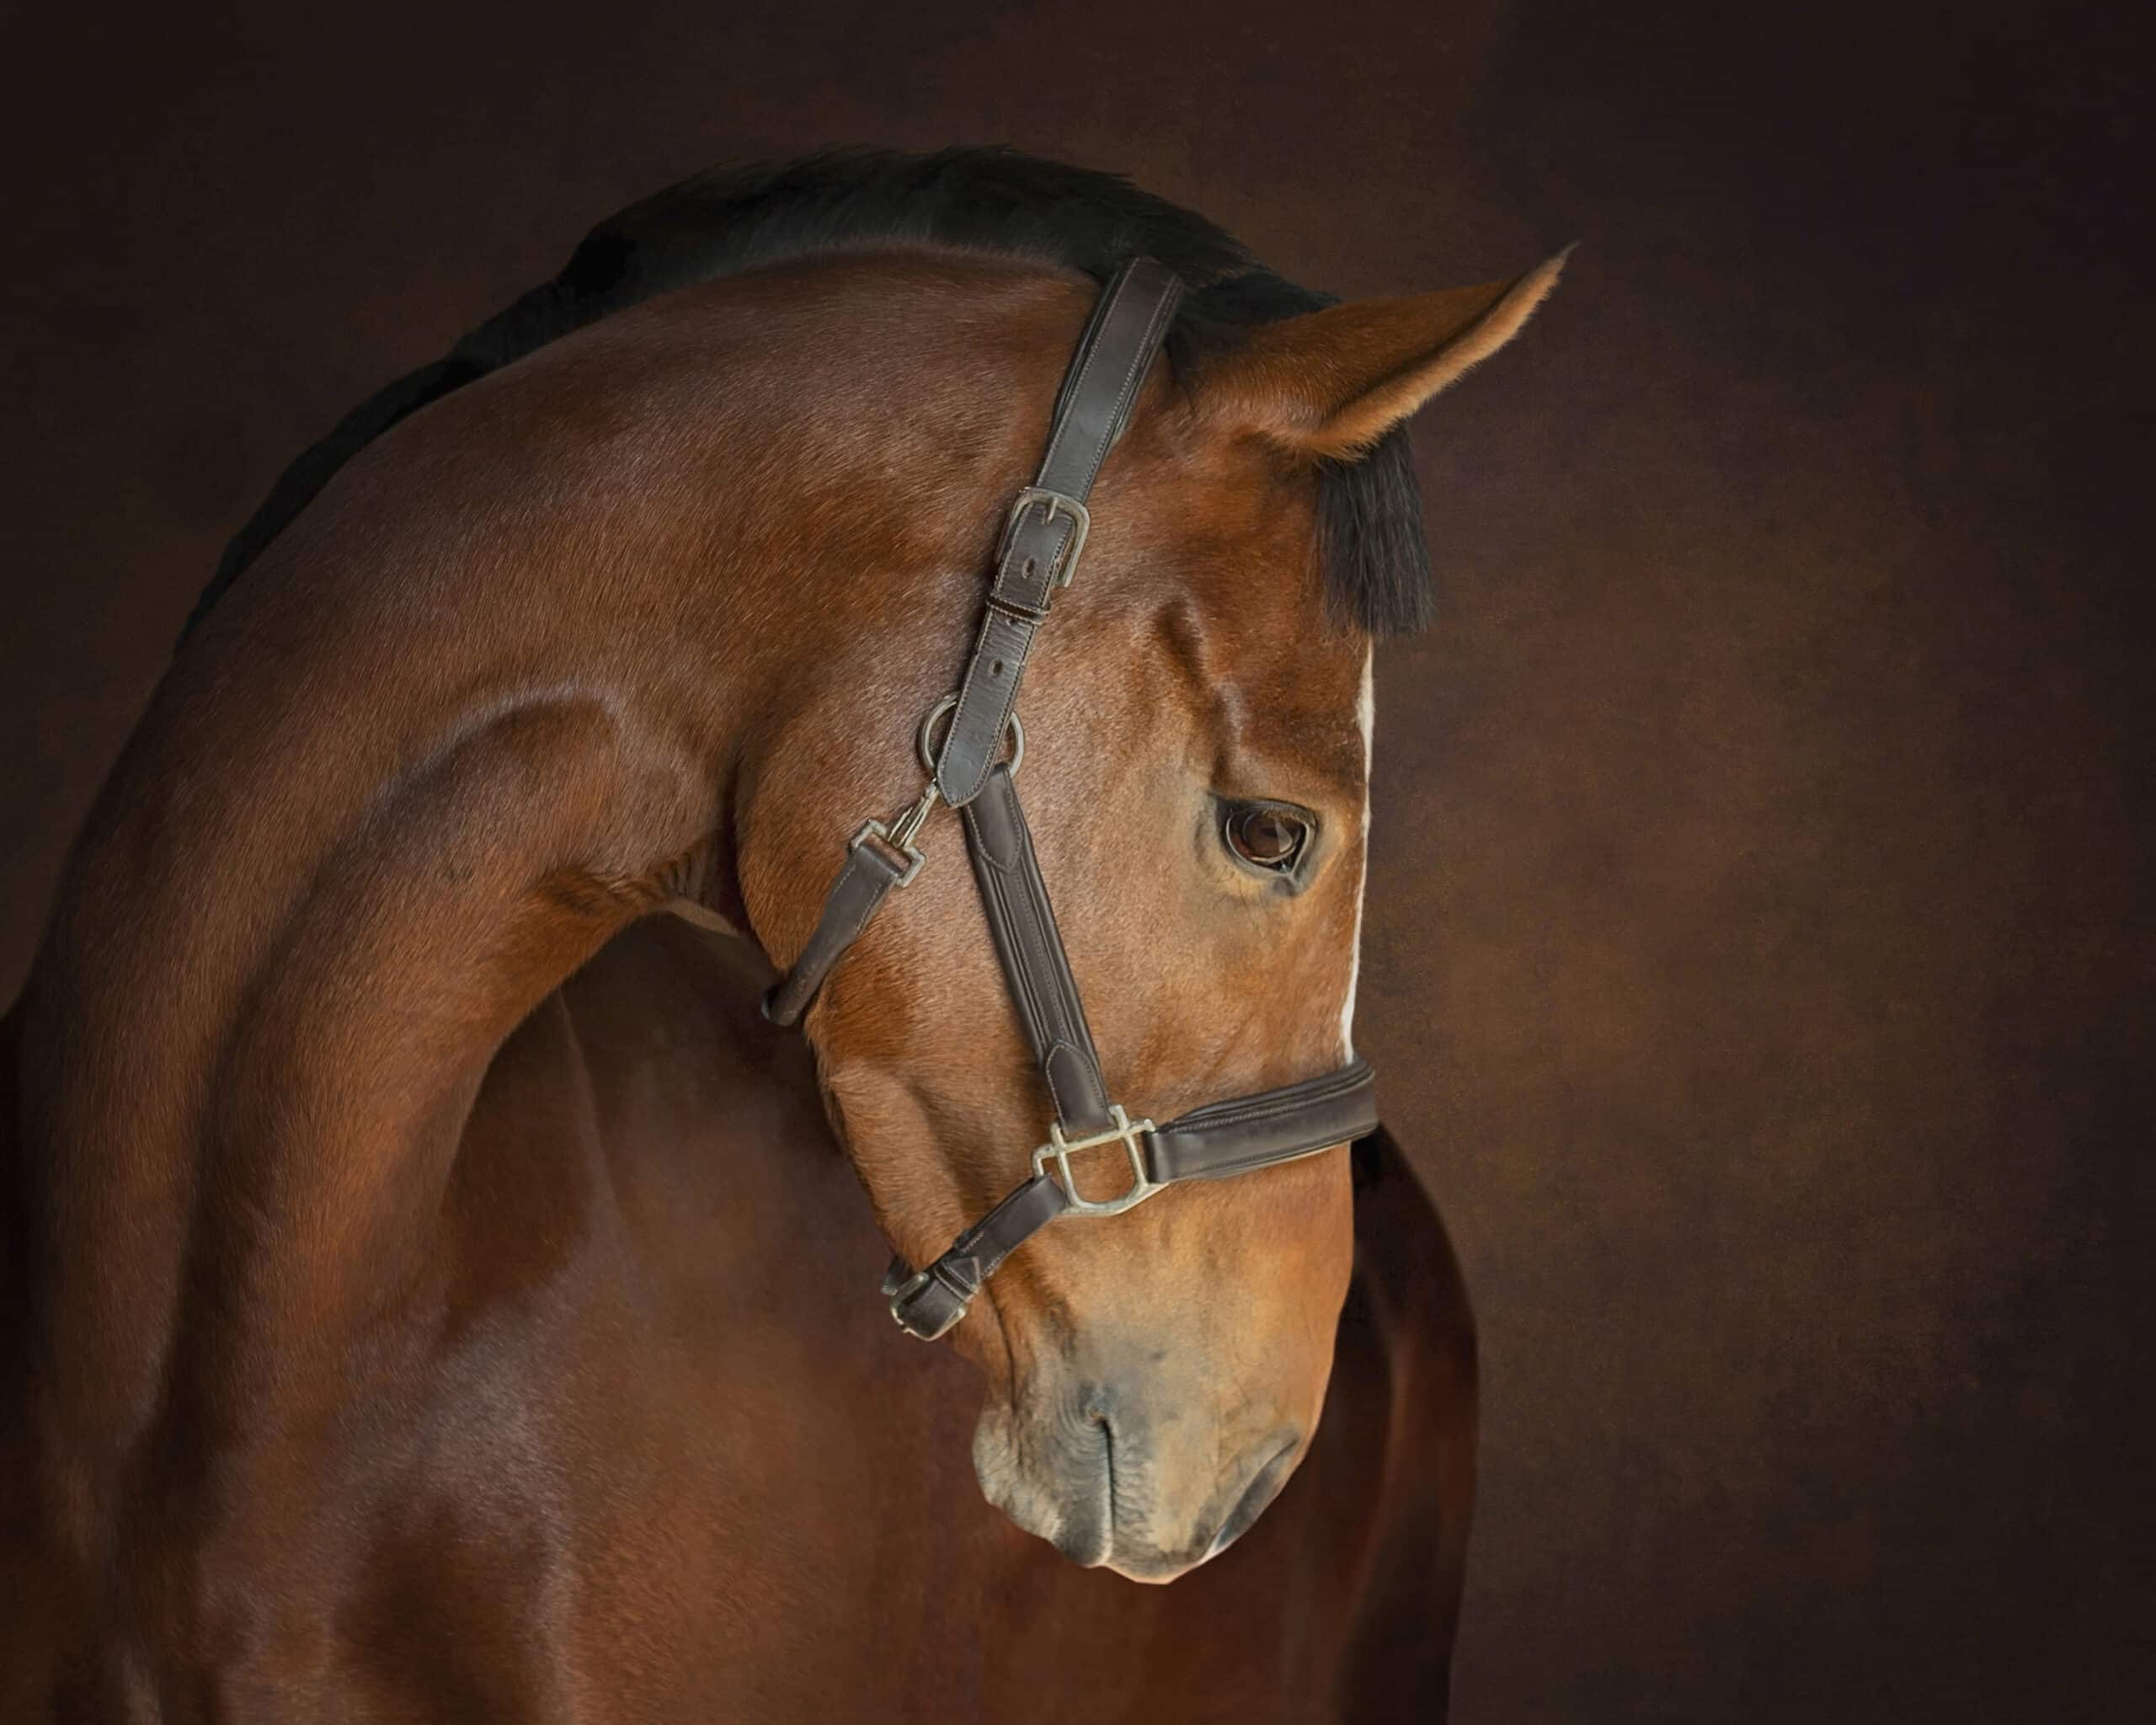 Equestrian and horse photography